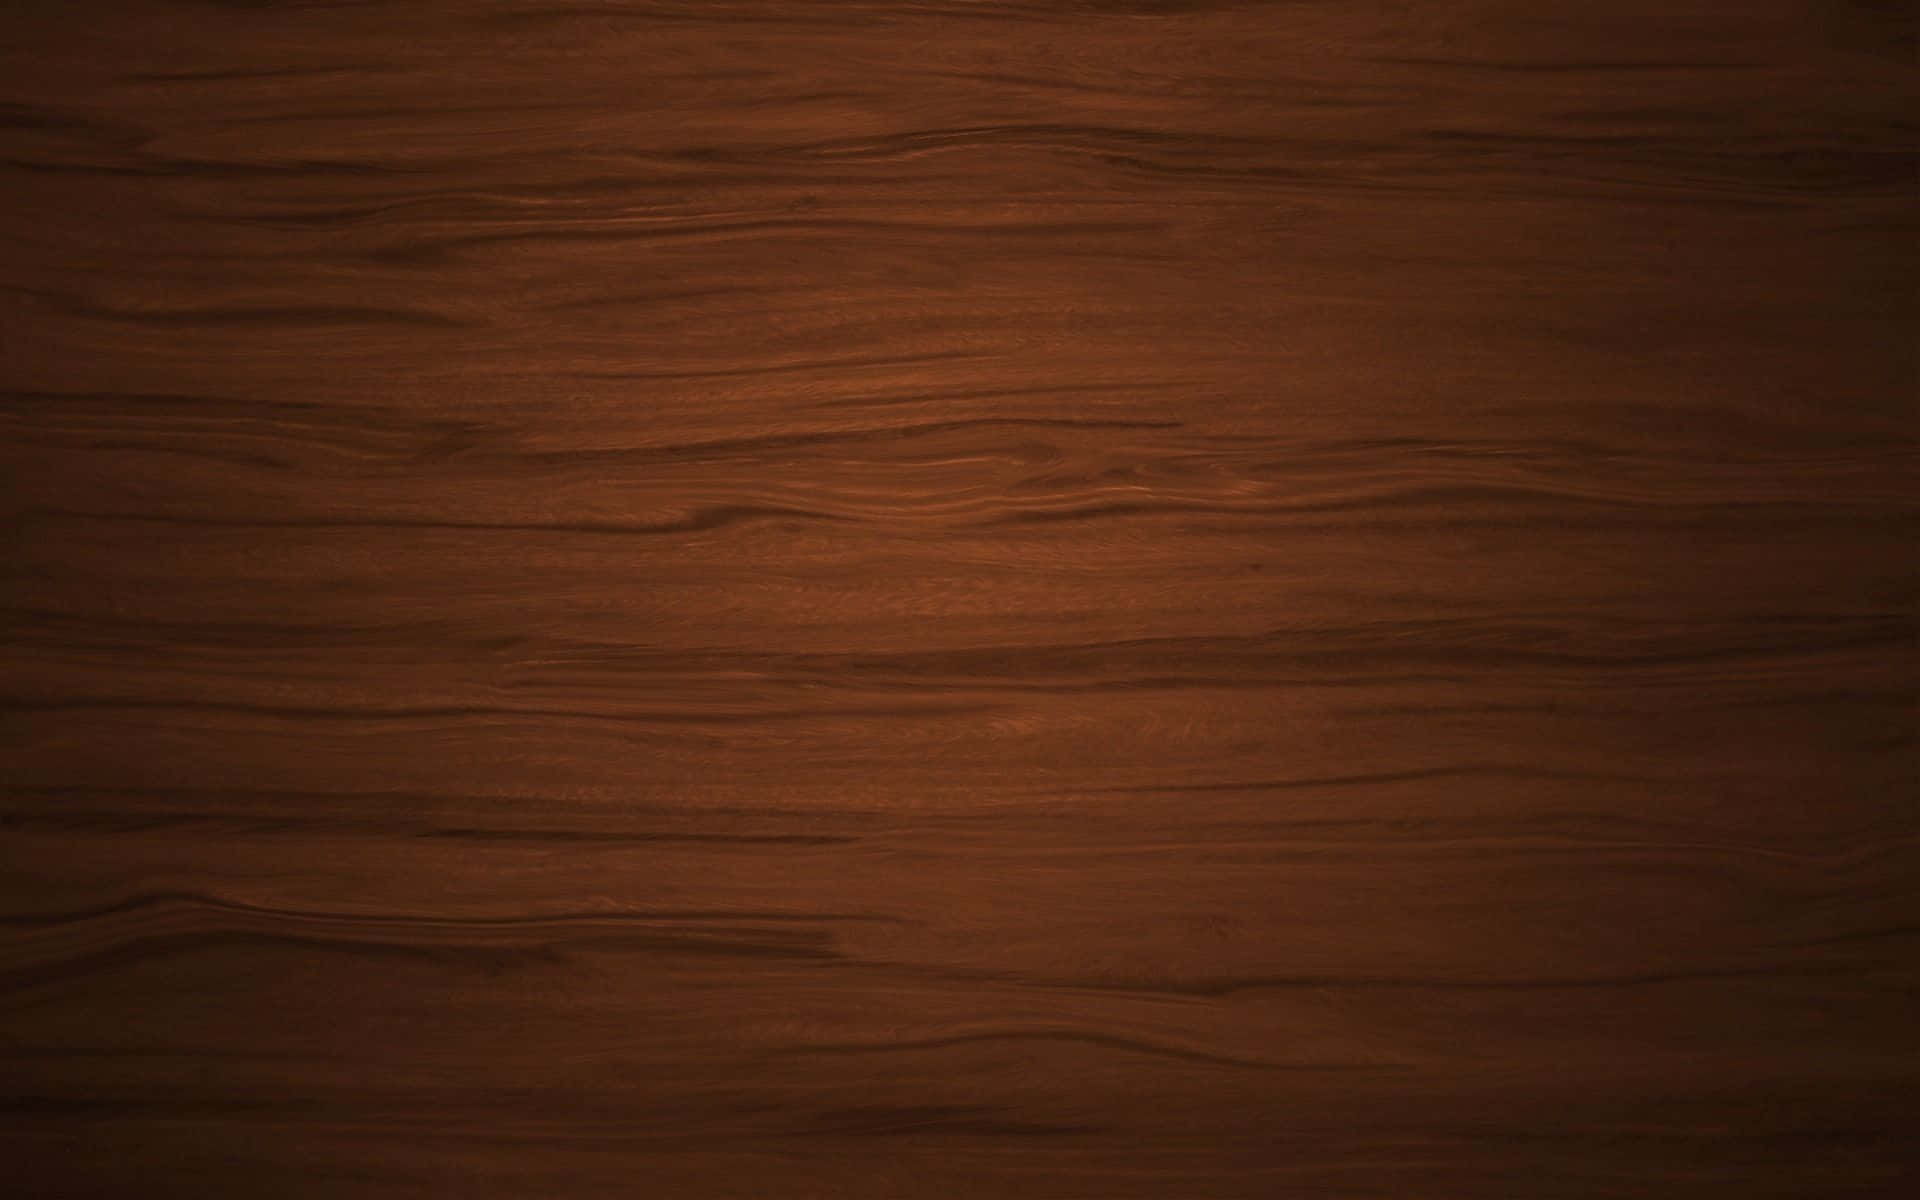 "Rustic brown wood grain texture in the background"